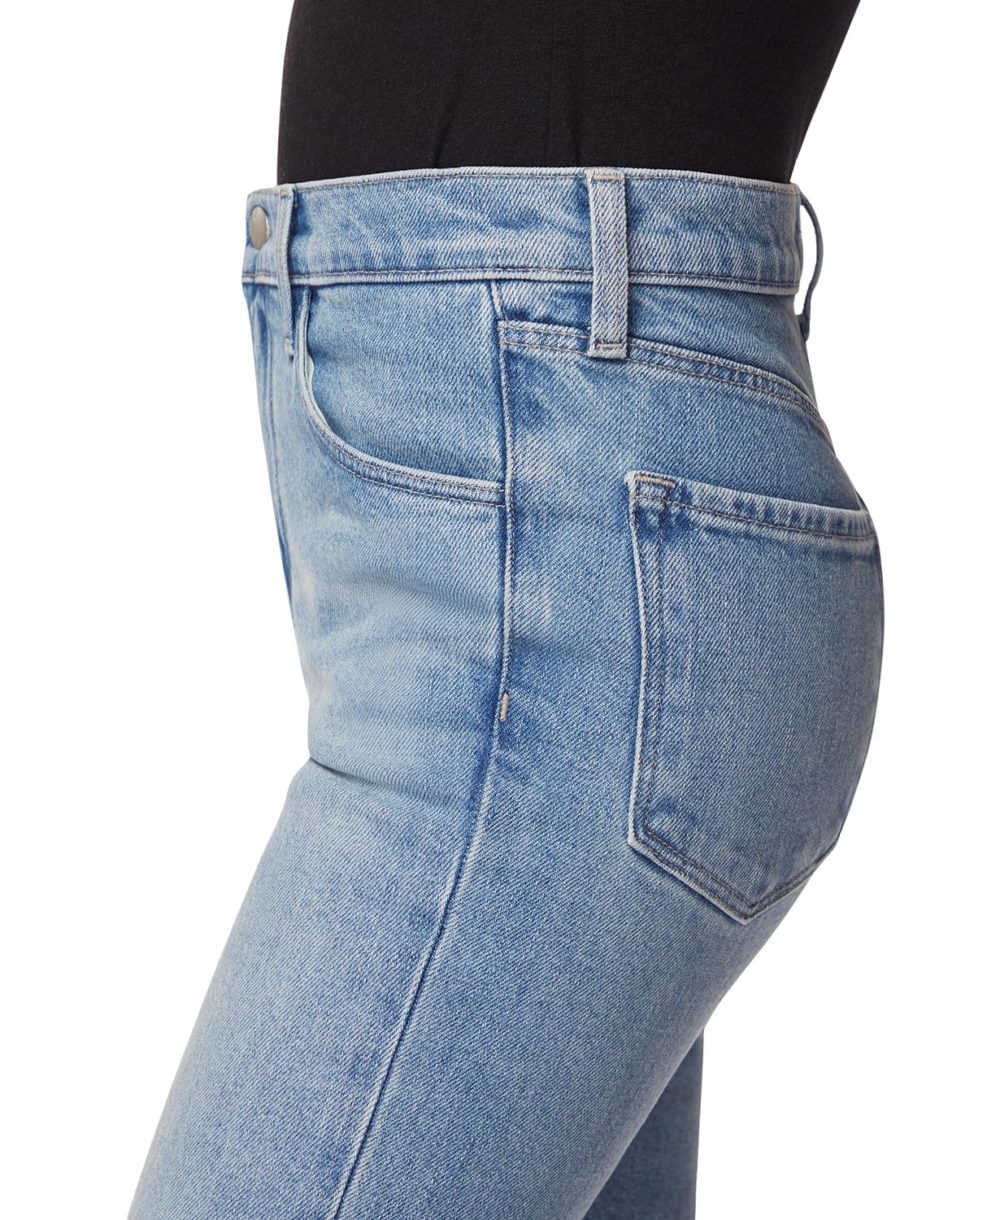 woocommerce-673321-2209615.cloudwaysapps.com-j-brand-womens-marcella-ruby-high-rise-cigarette-jeans